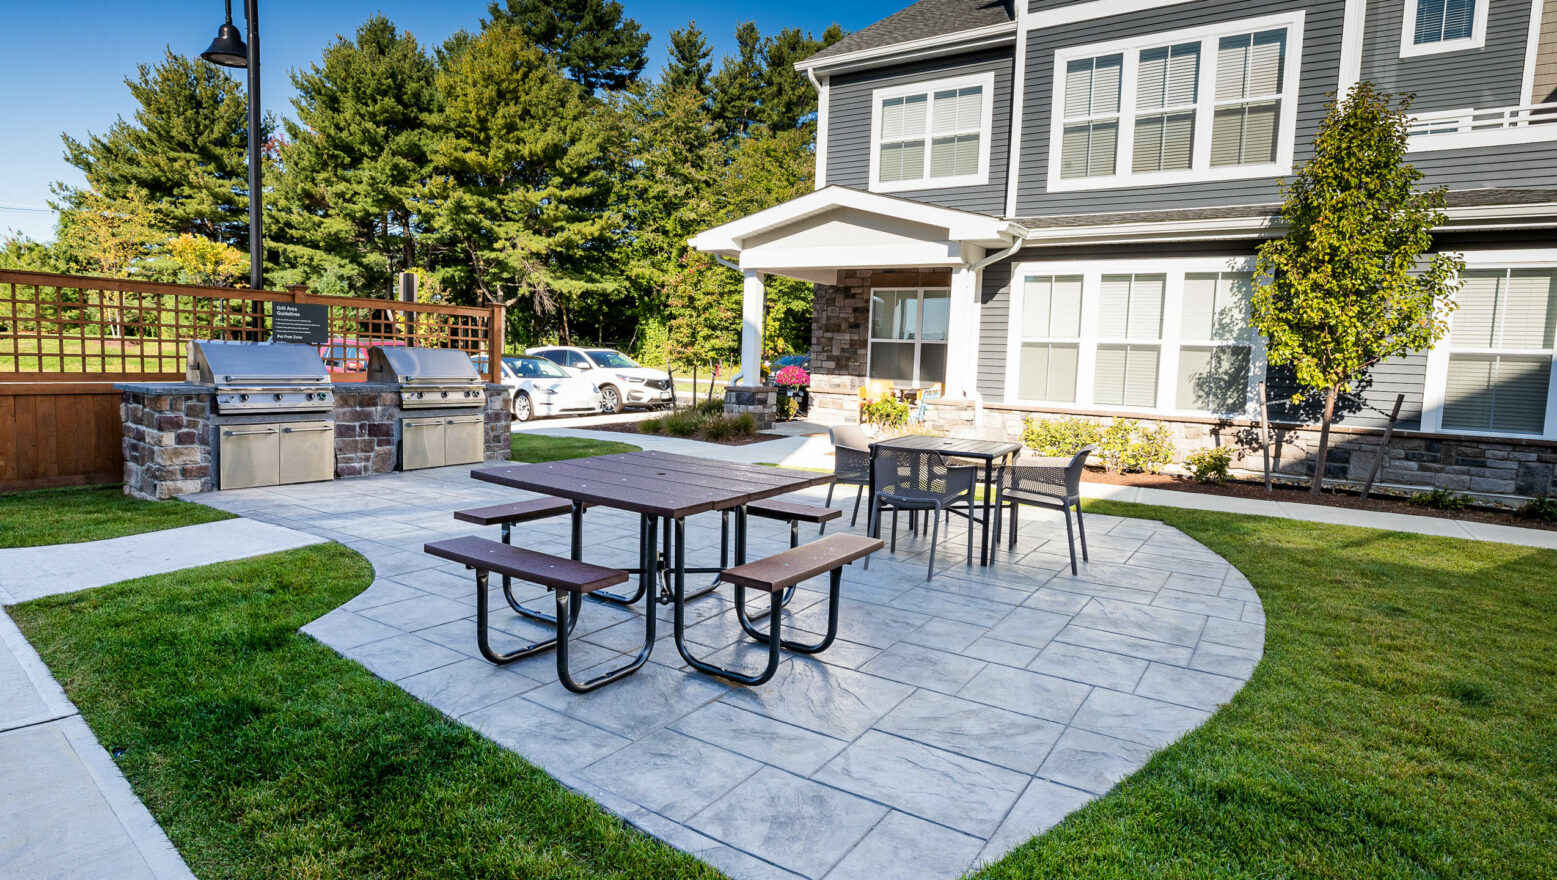 Amenity area with stamped concrete patio, outdoor kitchens, and tables. Commercial hardscape project by Dex by Terra.